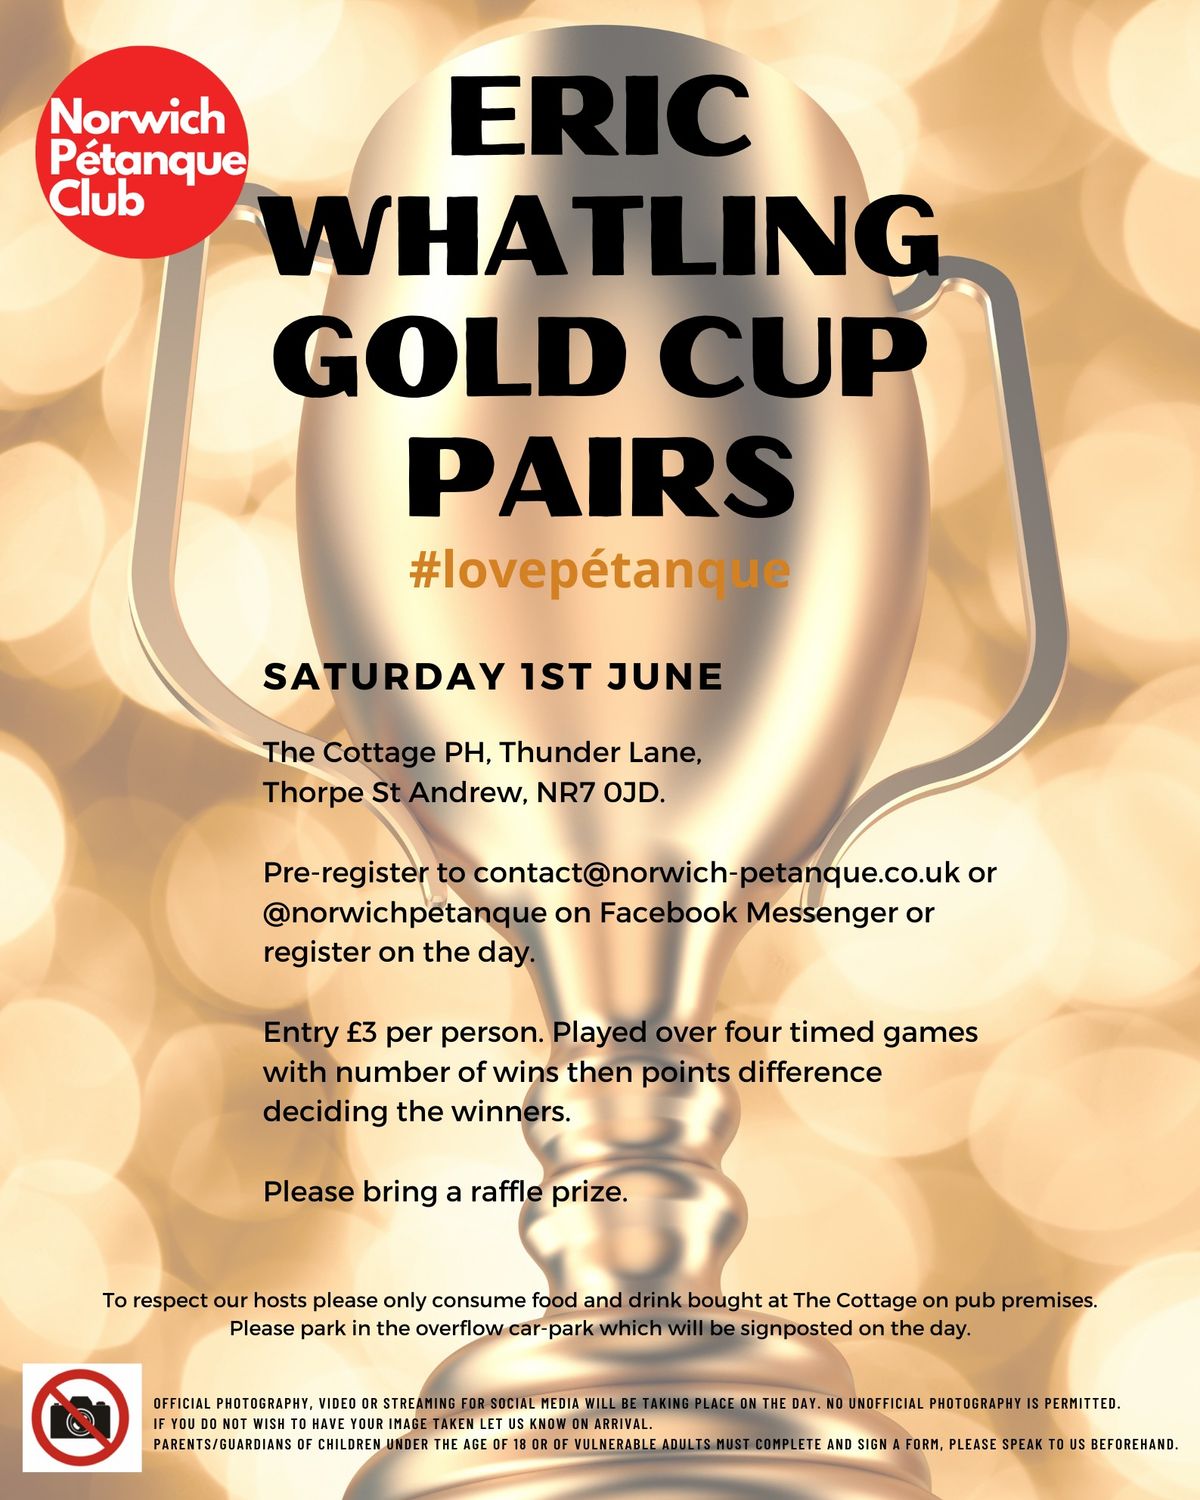 The Eric Whatling Gold Cup Pairs